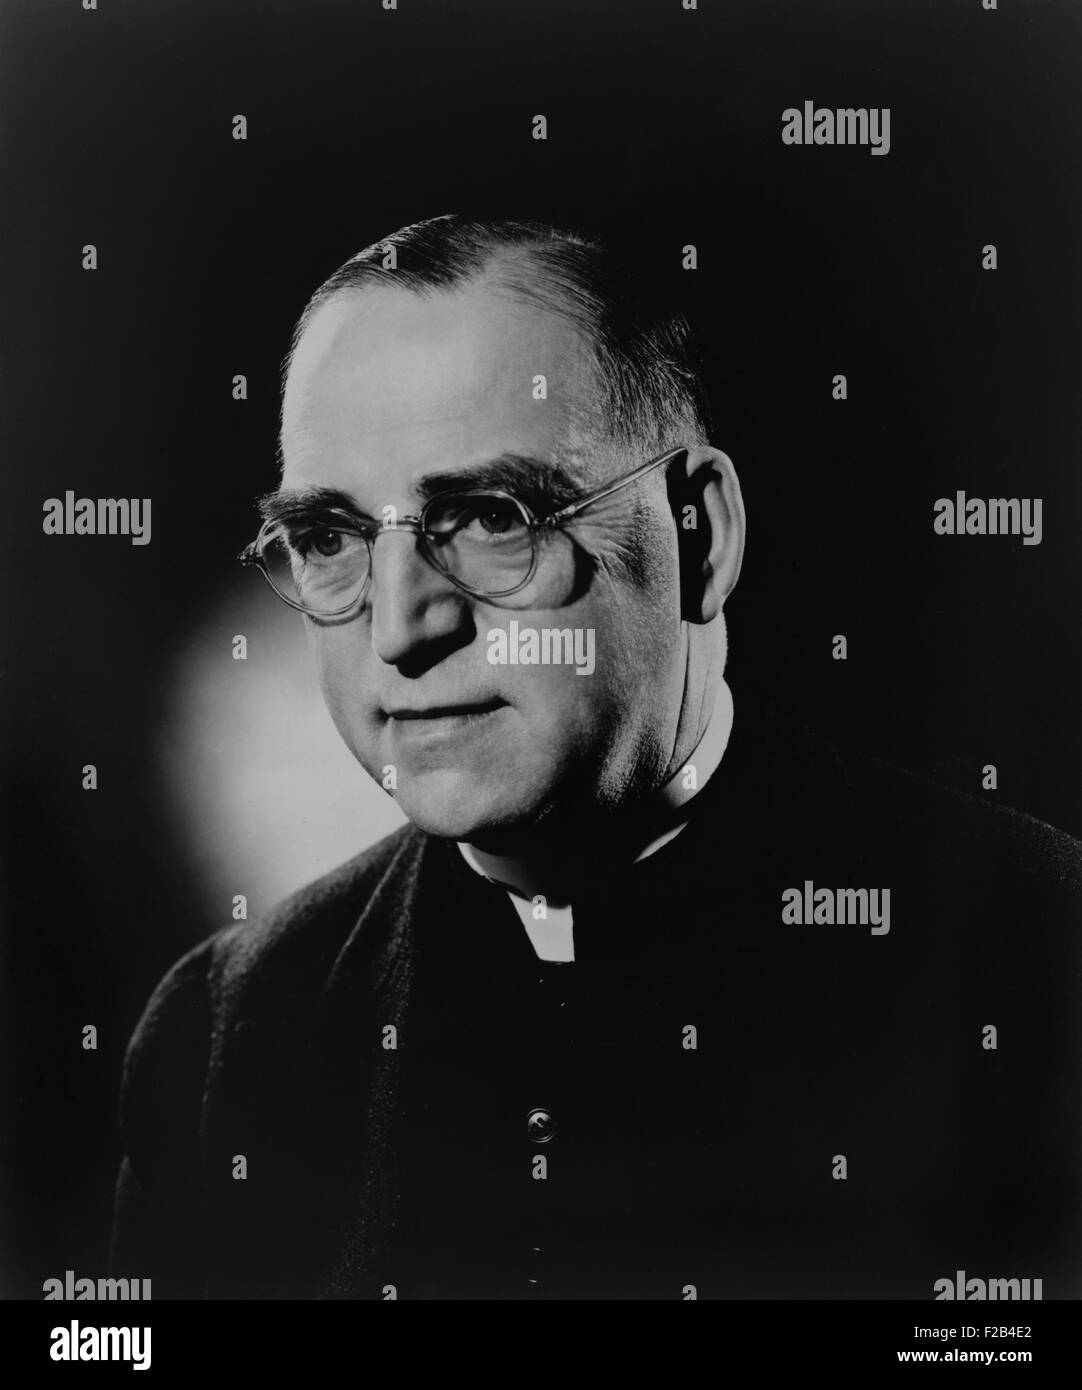 Father Edward J. Flanagan, founded 'Father Flanagan's Boys' Home' in 1917. It was an orphanage for boys between the ages of 10 and 16 where they received an education and learned a trade. Flanagan was portrayed by Spencer Tracey in the 1938 film, BOY'S TOWN, based on the life of Father Flanagan. Ca. 1938. - (BSLOC 2015 1 55) Stock Photo